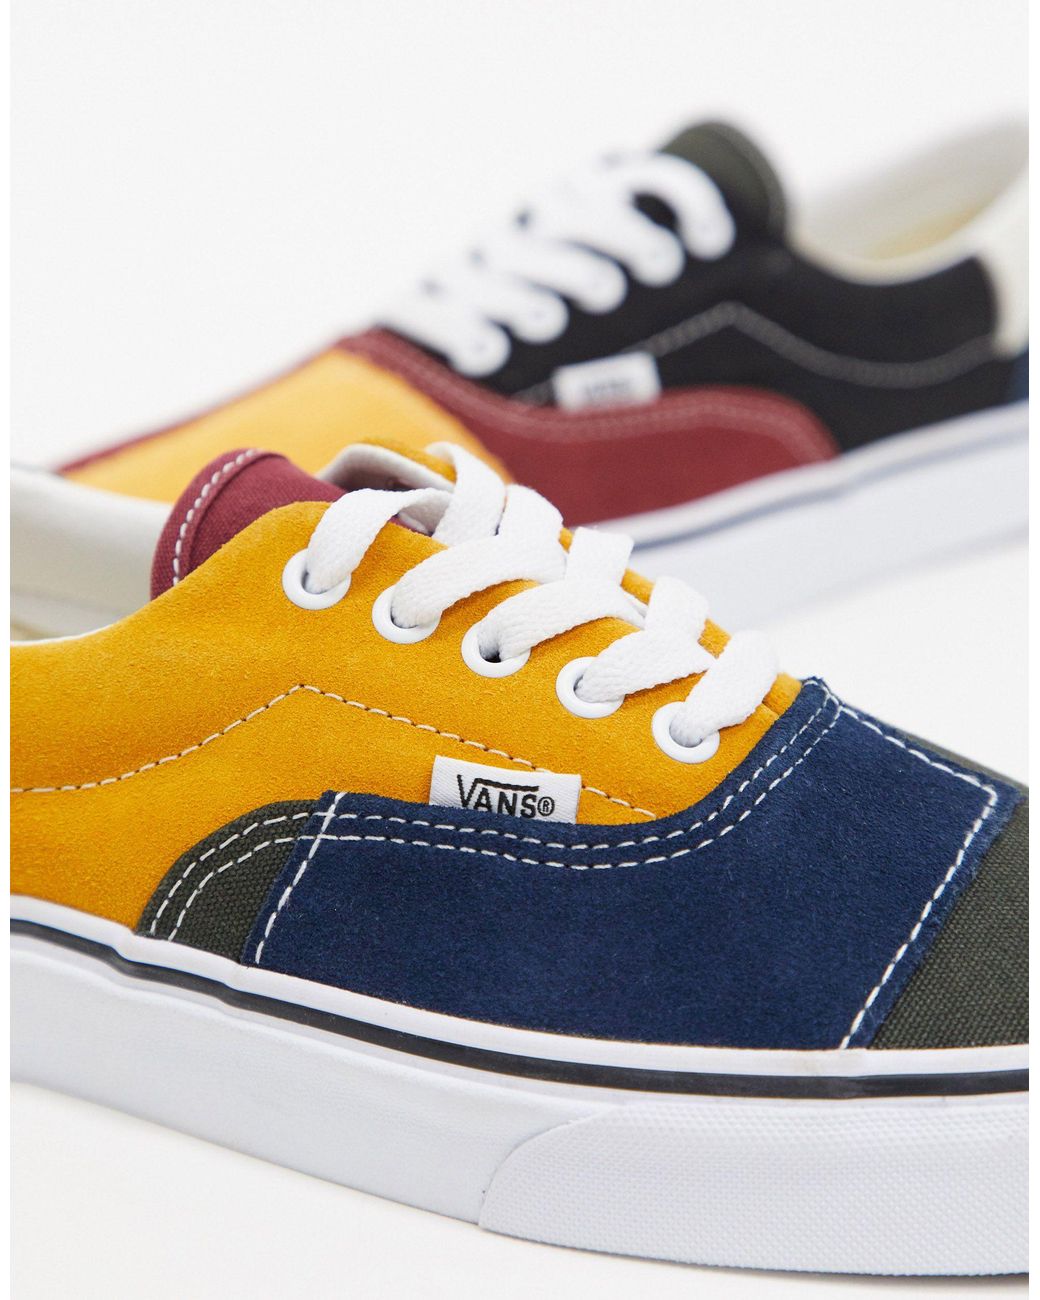 Vans Canvas Patchwork Era Sneakers in Blue for Men - Save 15% - Lyst